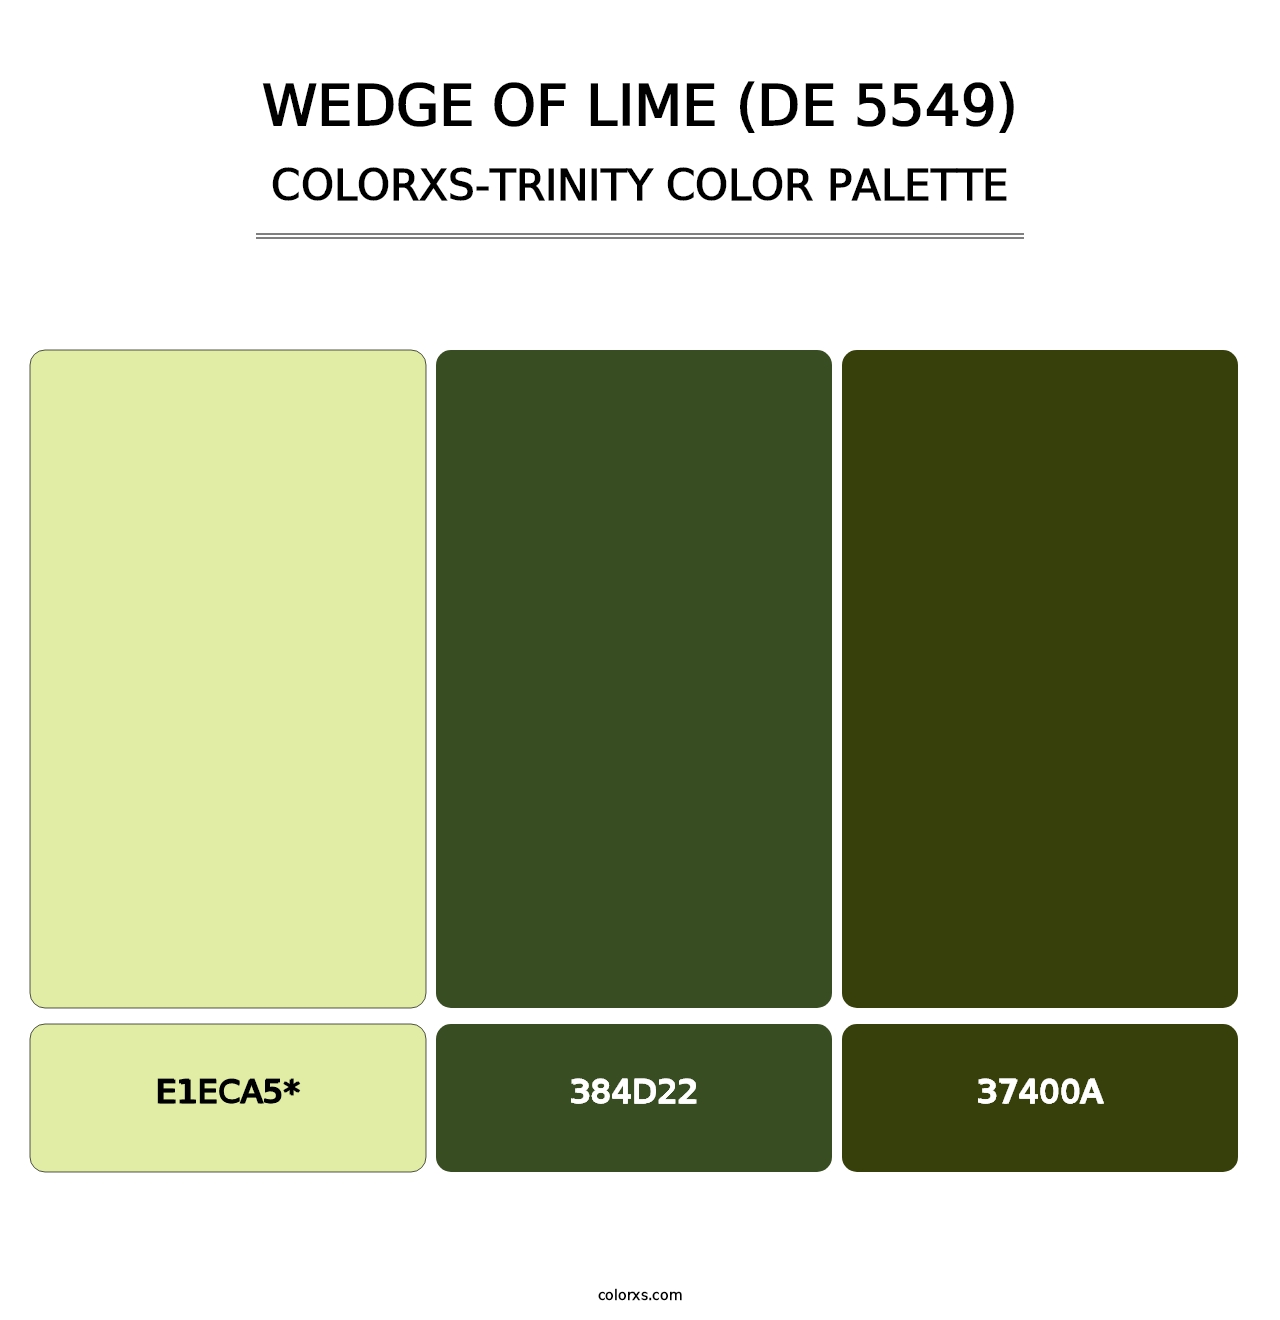 Wedge of Lime (DE 5549) - Colorxs Trinity Palette